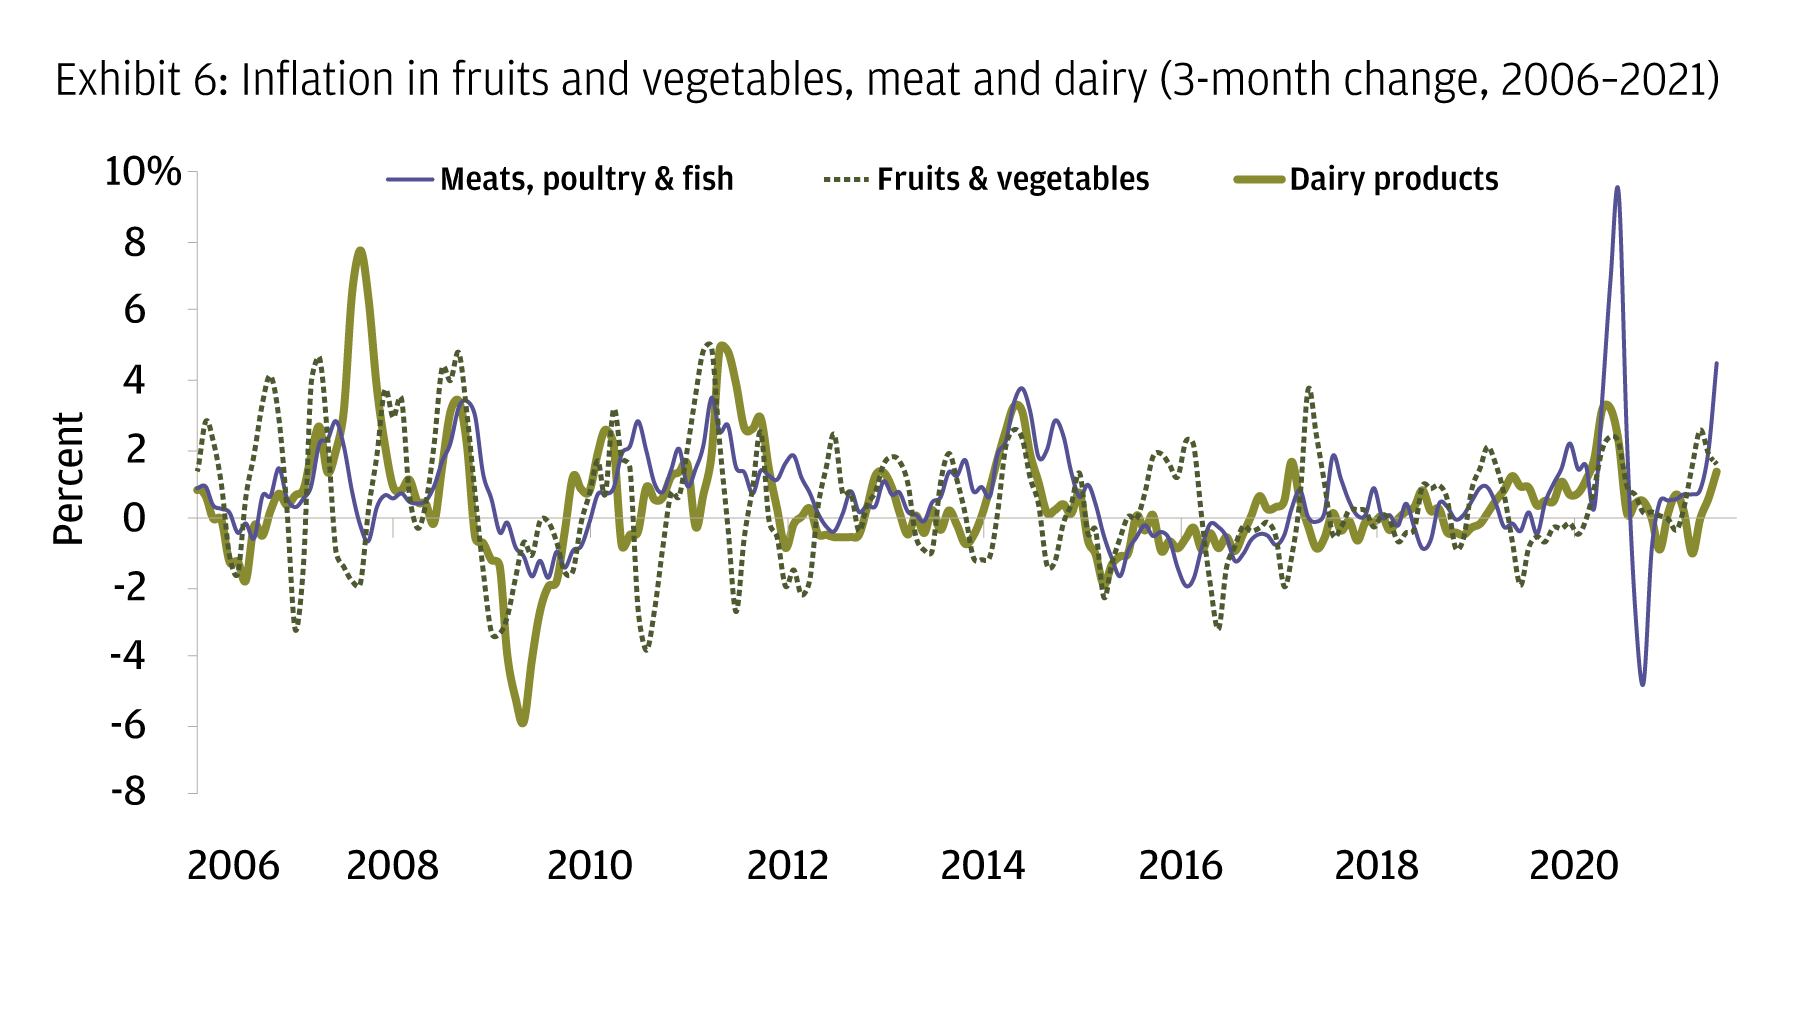 Line chart shows 3 lines for percent inflation in price of meats, produce and dairy since 2006; meat spiked sharply in 2020 and then reversed; meat and dairy inflation are currently rising.